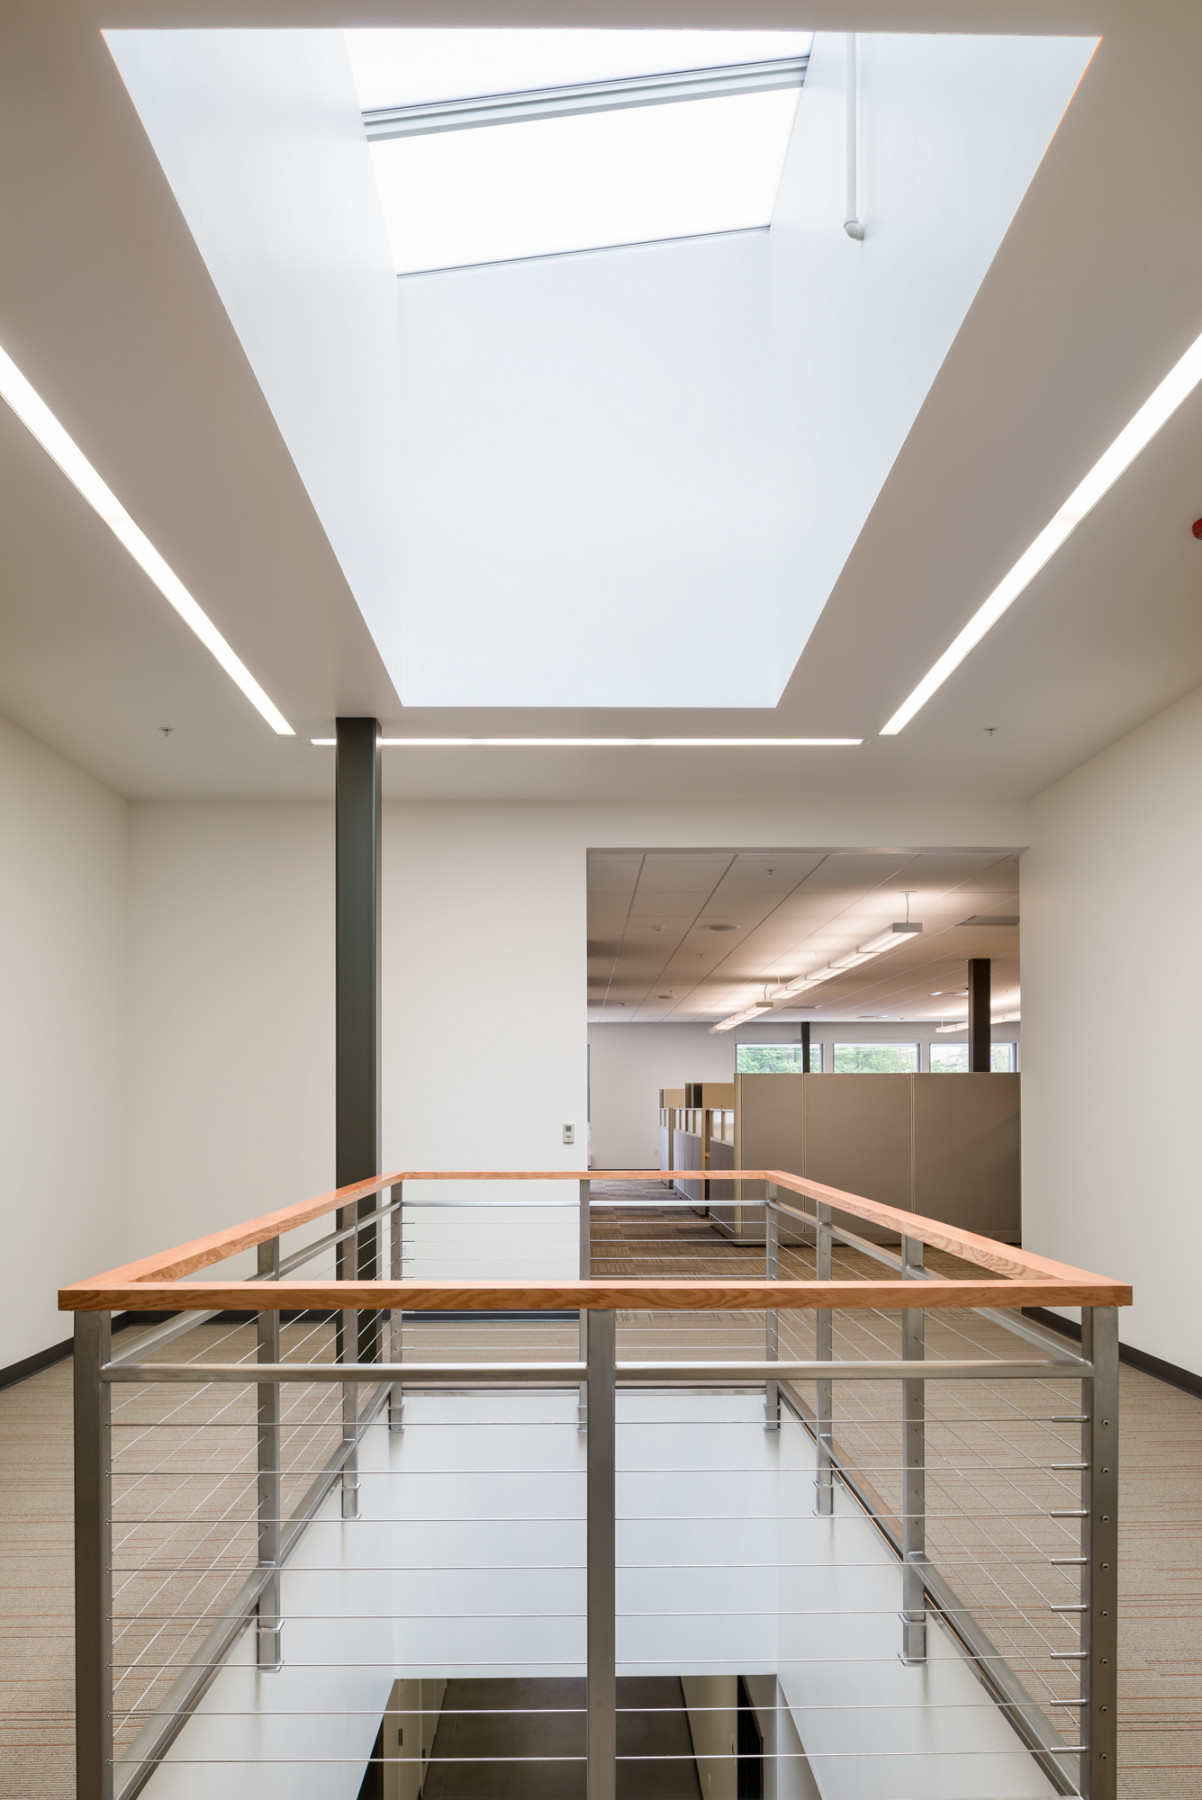 Wood Bannisters And Skylight In A LEED Gold Certified Building.